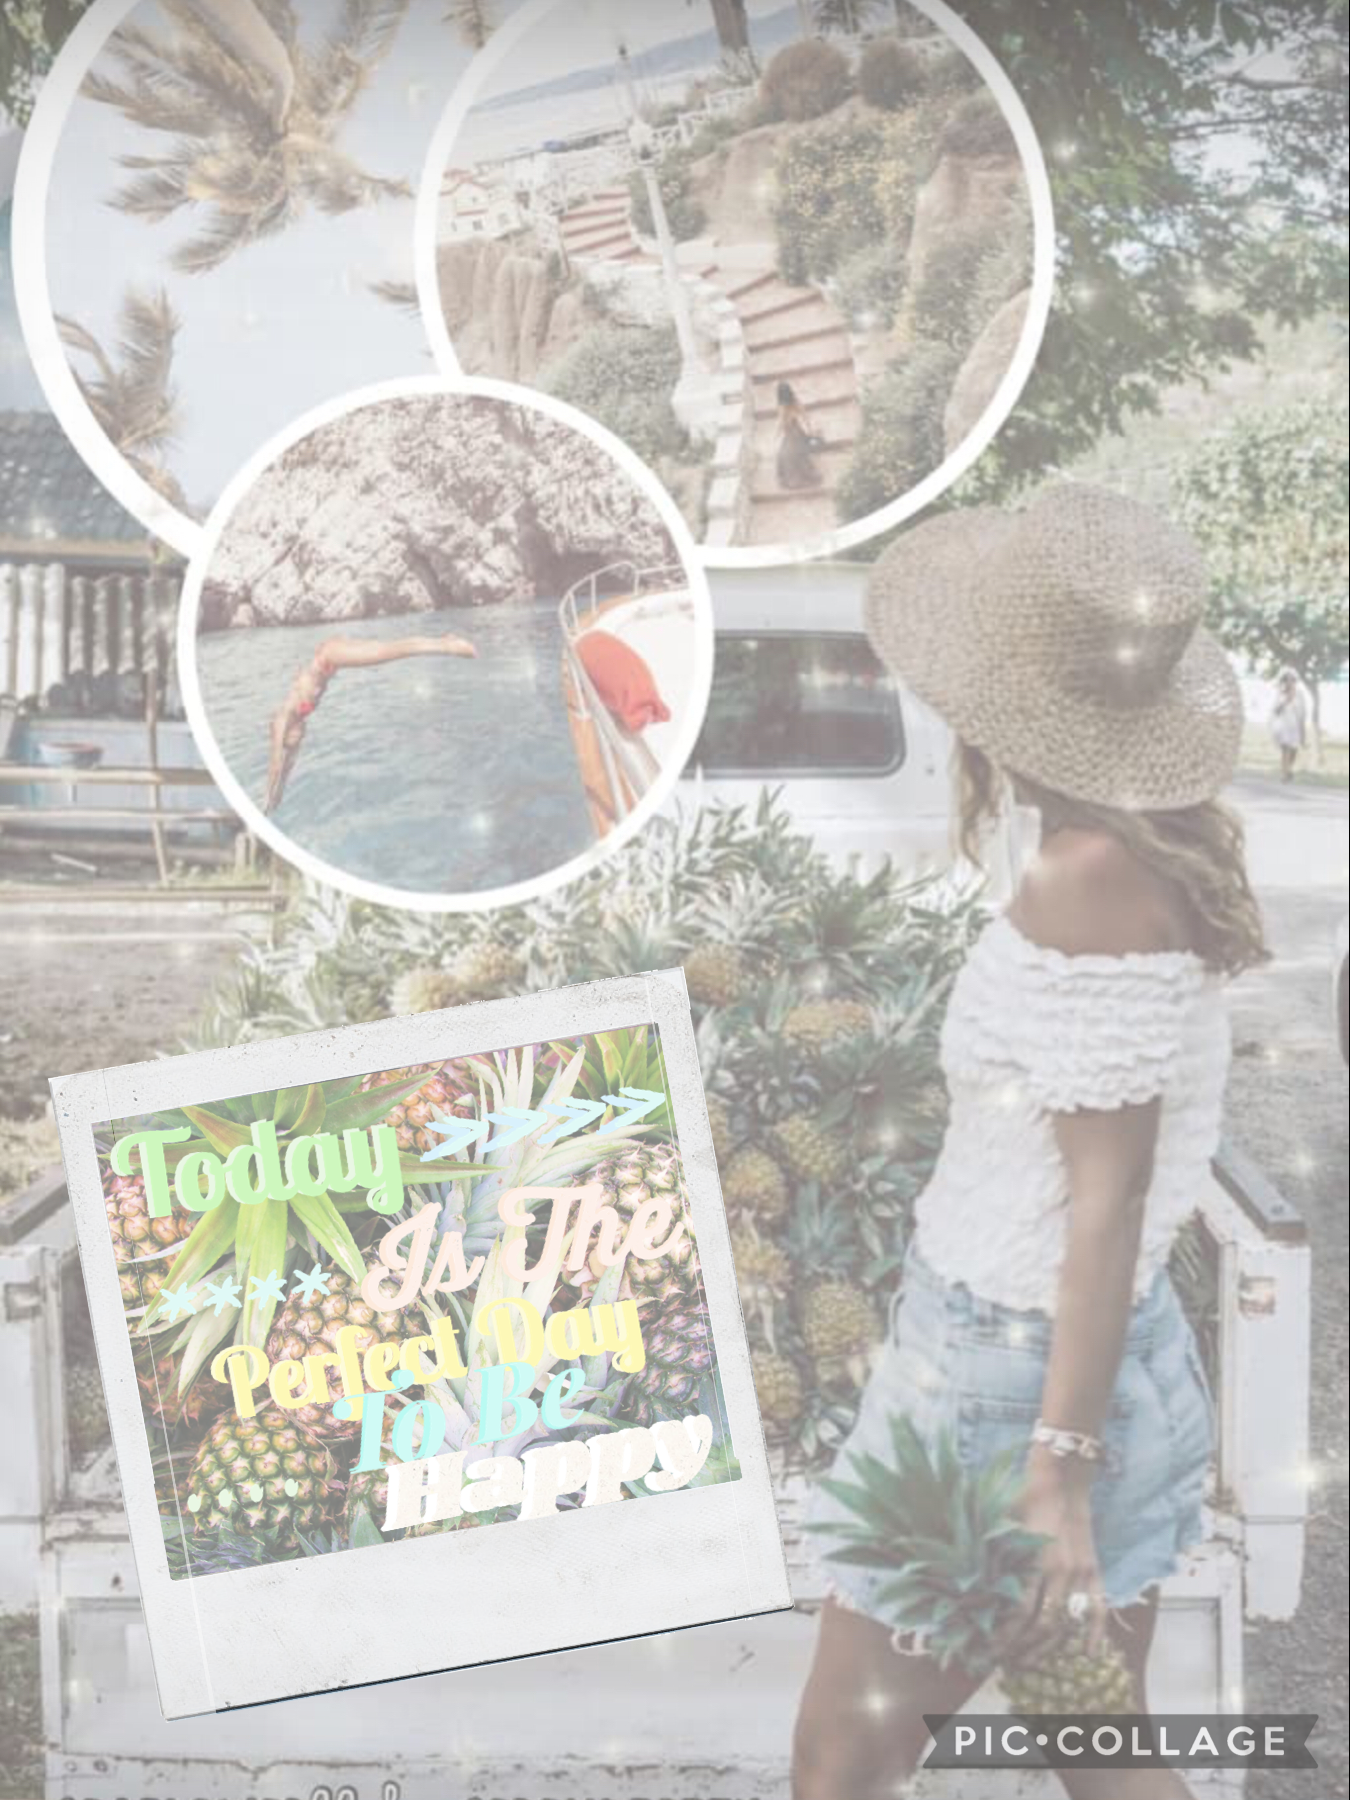 🌴Tap🌴
This collage was so fun to make Serendipity is a stunning collage I love all her collages she has made they are amazing! She did the stunning  background and I did the text I hope we can do it again soon! 